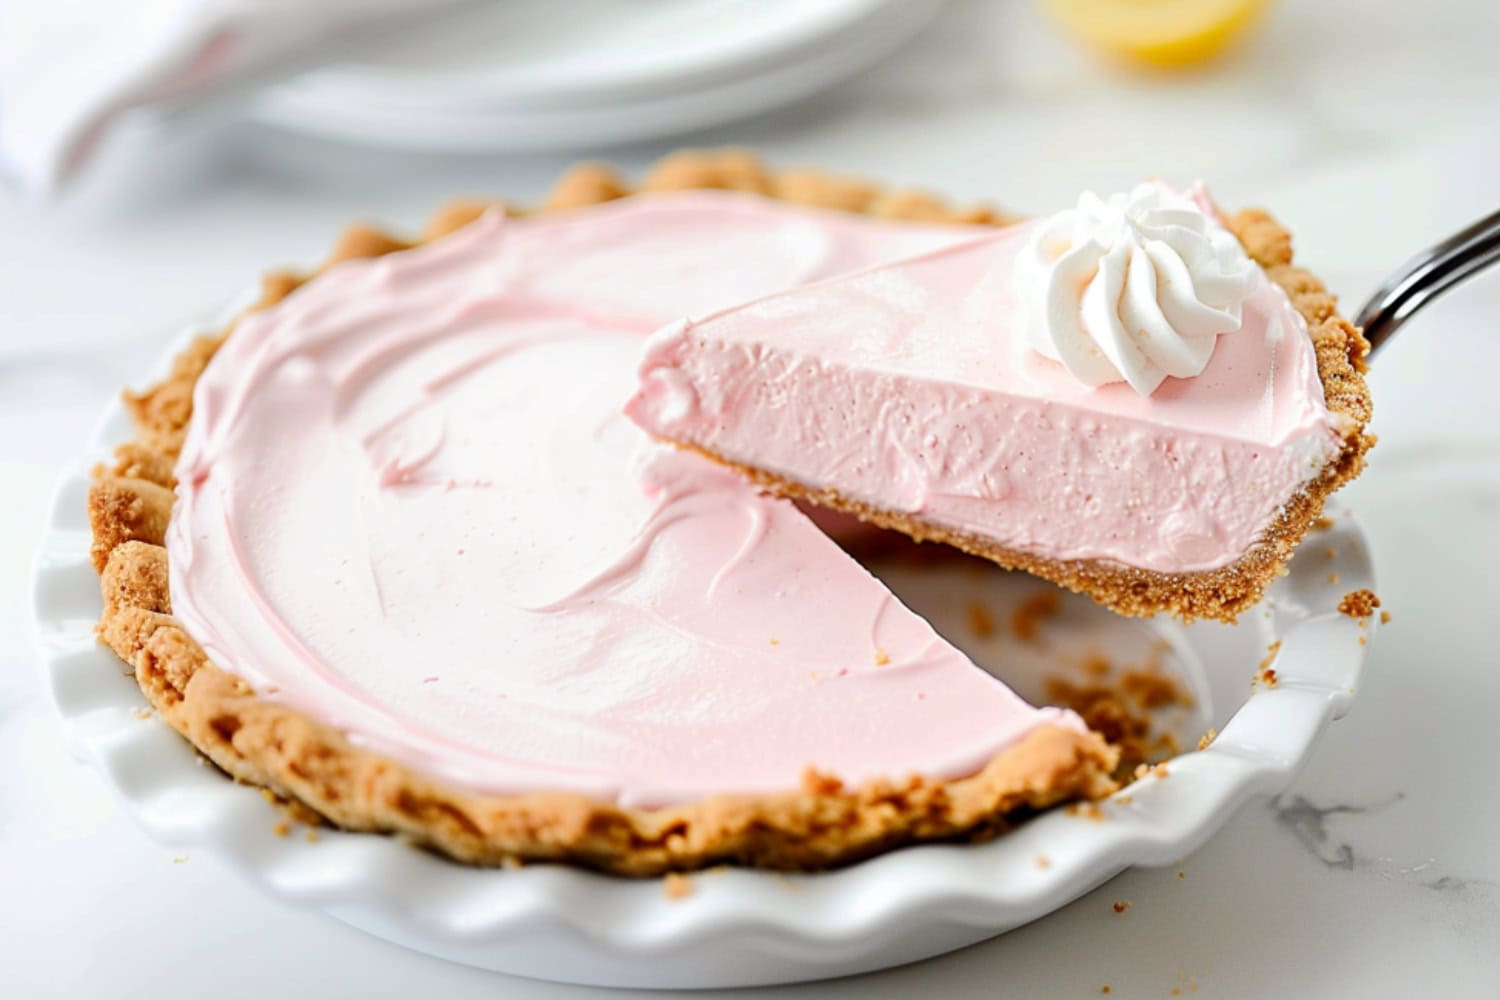 A portion of a pink lemonade pie being lifted by a pie ladle.